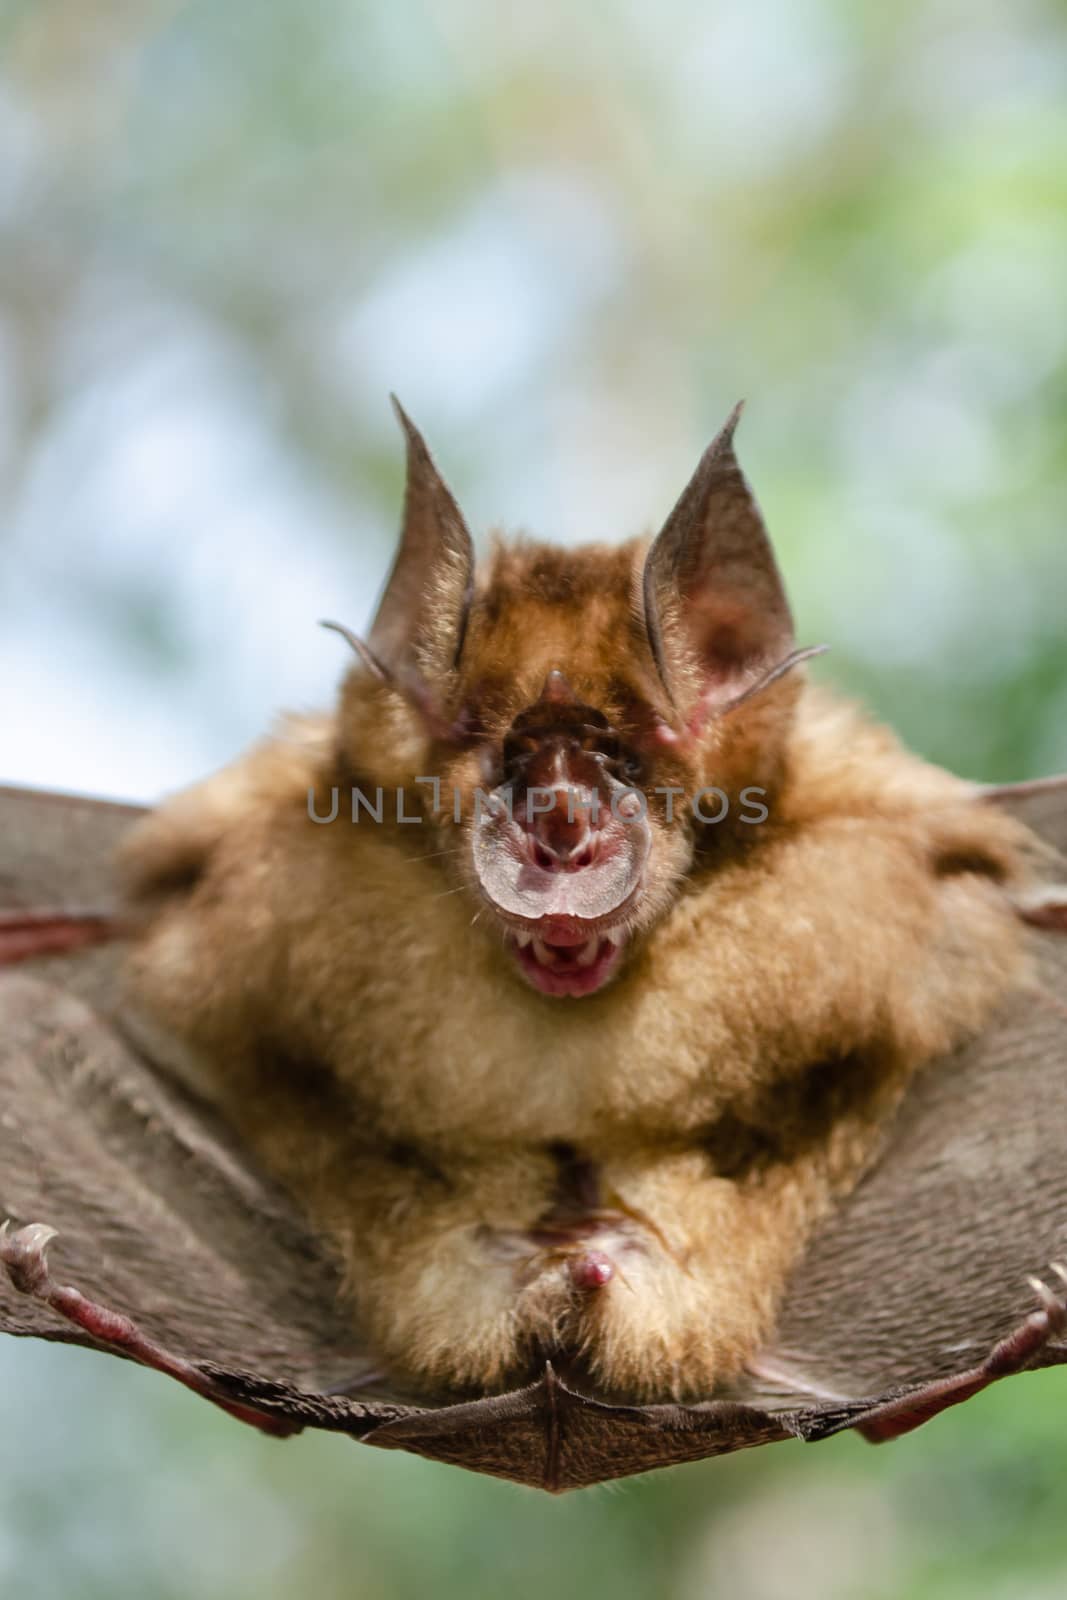 Blyth's Horseshoe Bat  are sleeping in the cave hanging on the ceiling period midday